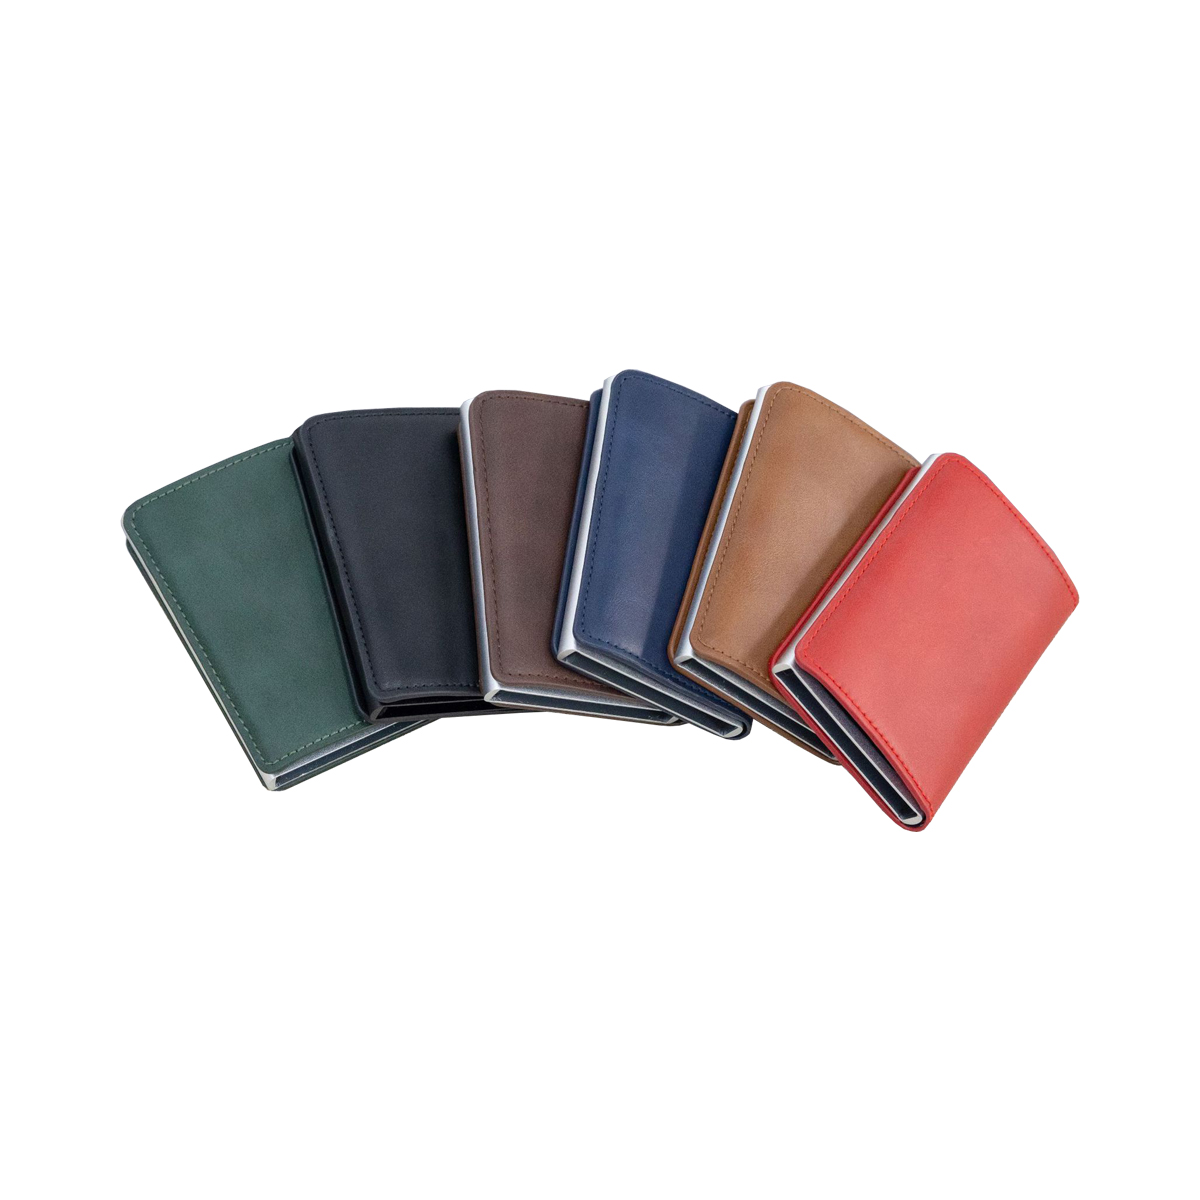 Credit Card Holder with RFID Slim Block in PU Leather and Aluminum